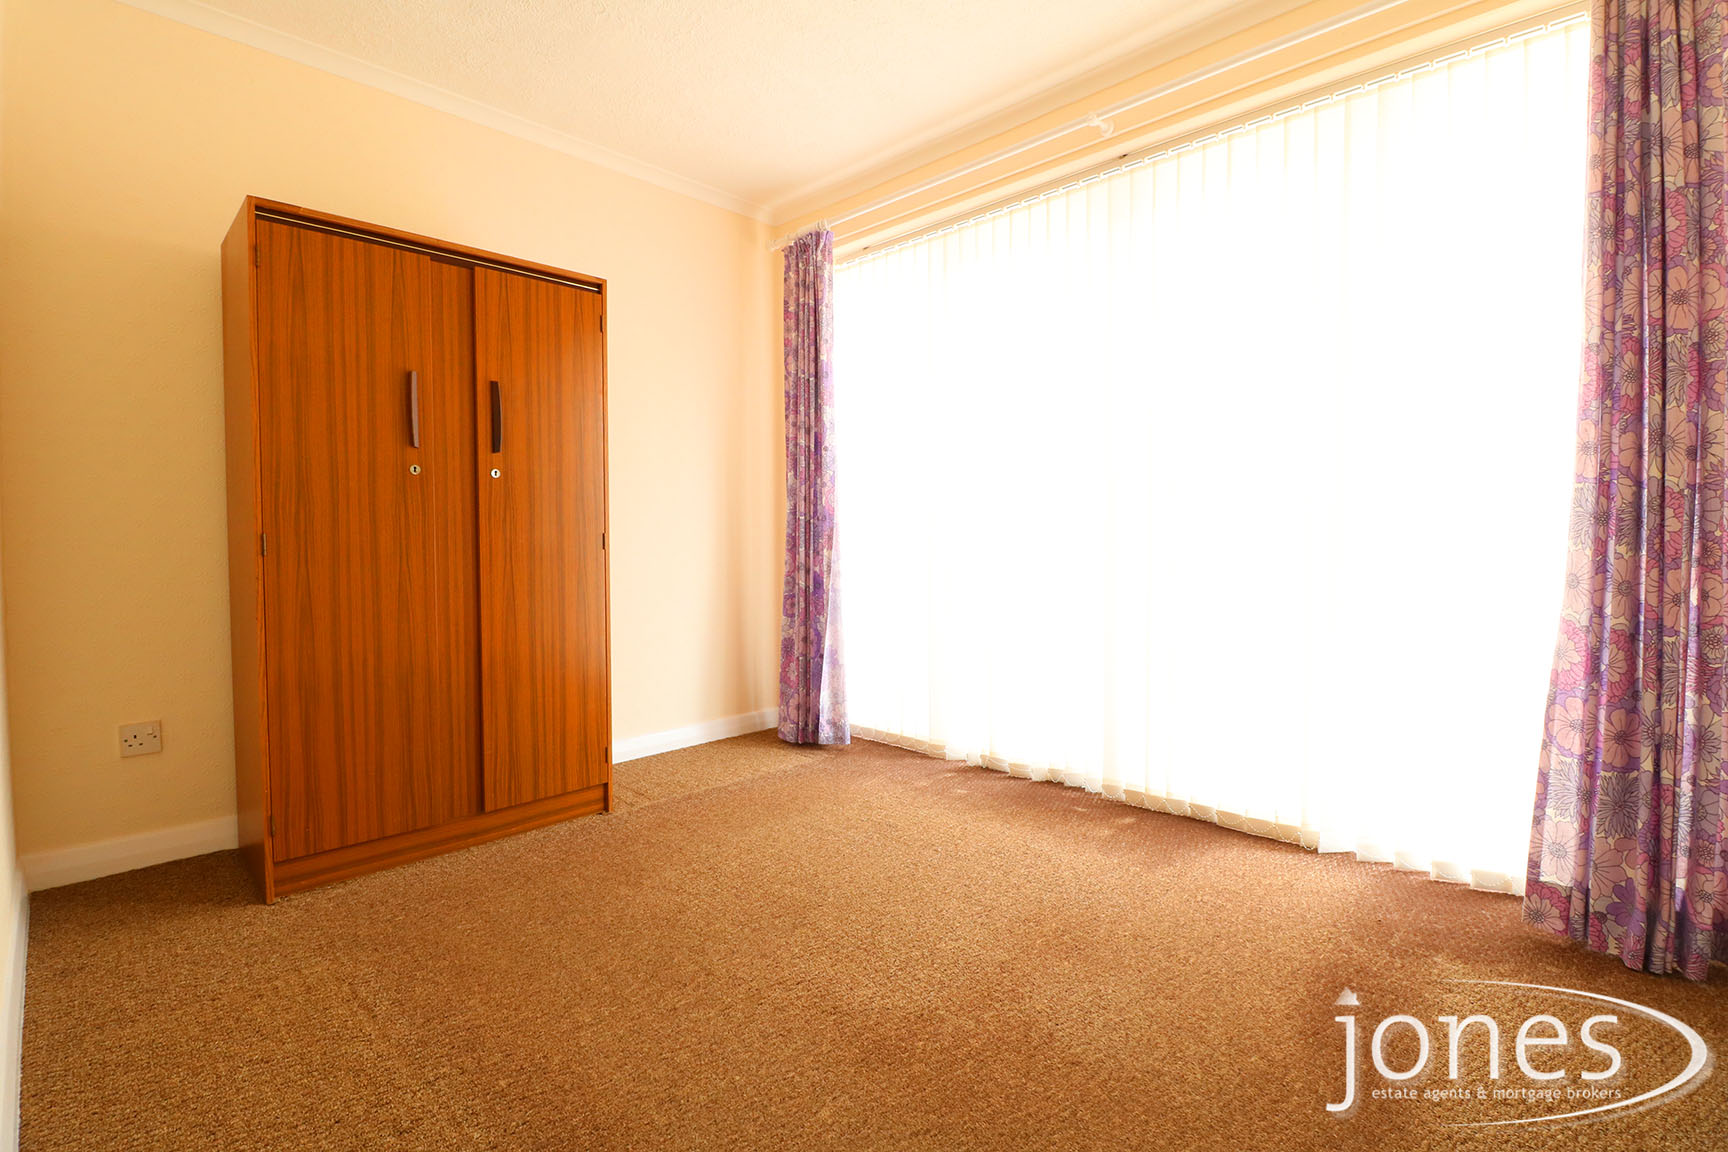 Home for Sale Let - Photo 05 Sycamore Road, Stockton on Tees, TS19 0NB